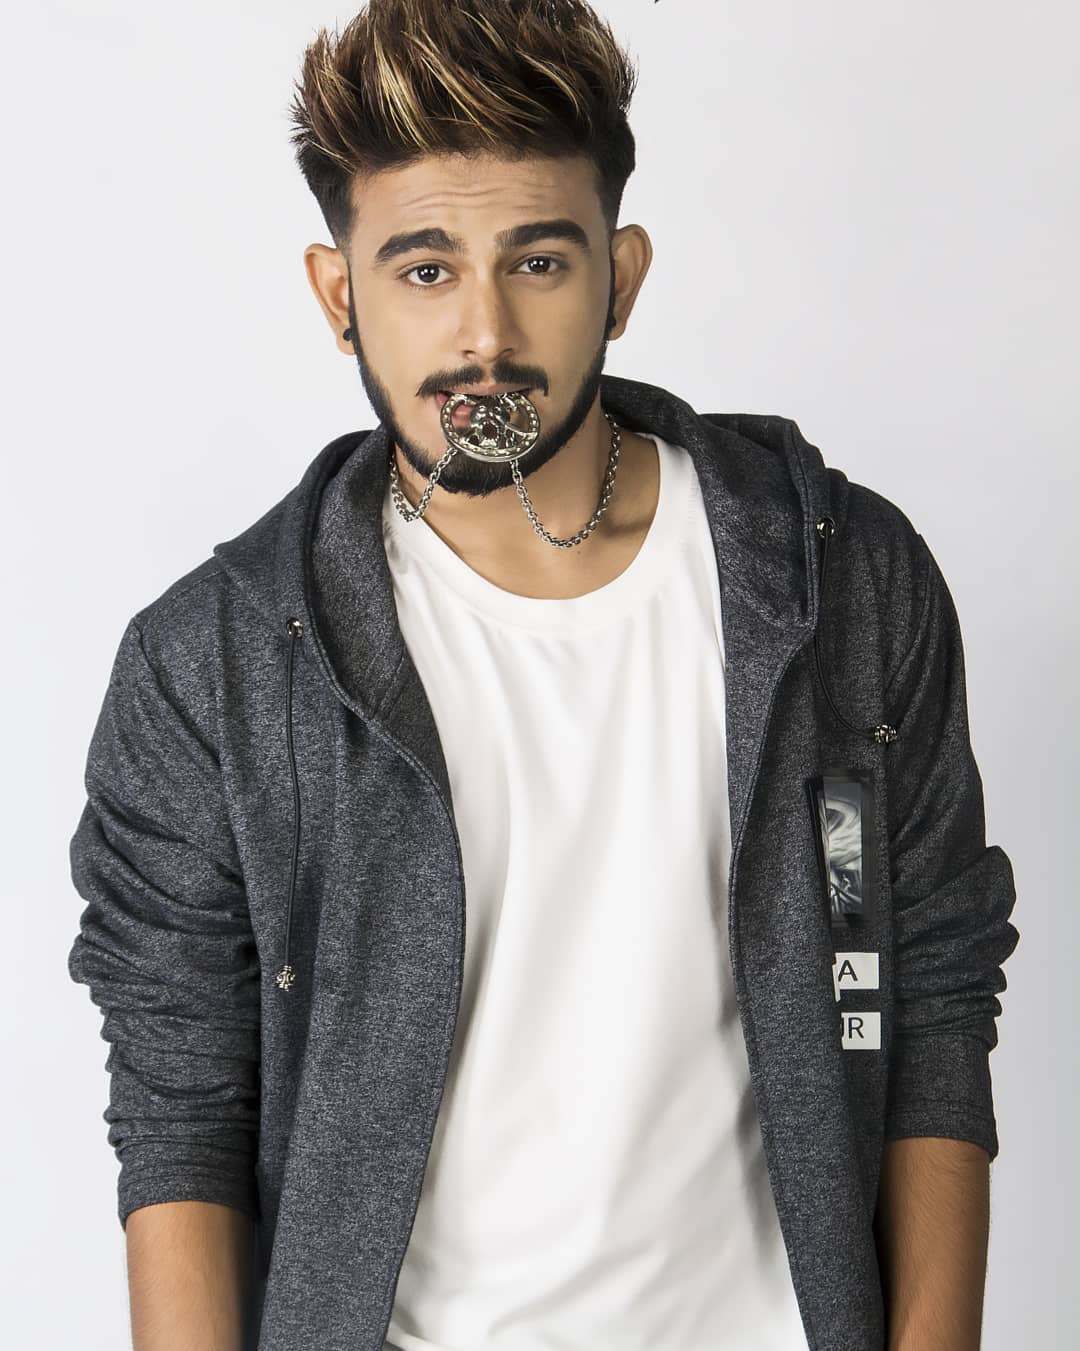 Shubham Deorukhar holding a neck locket in his mouth